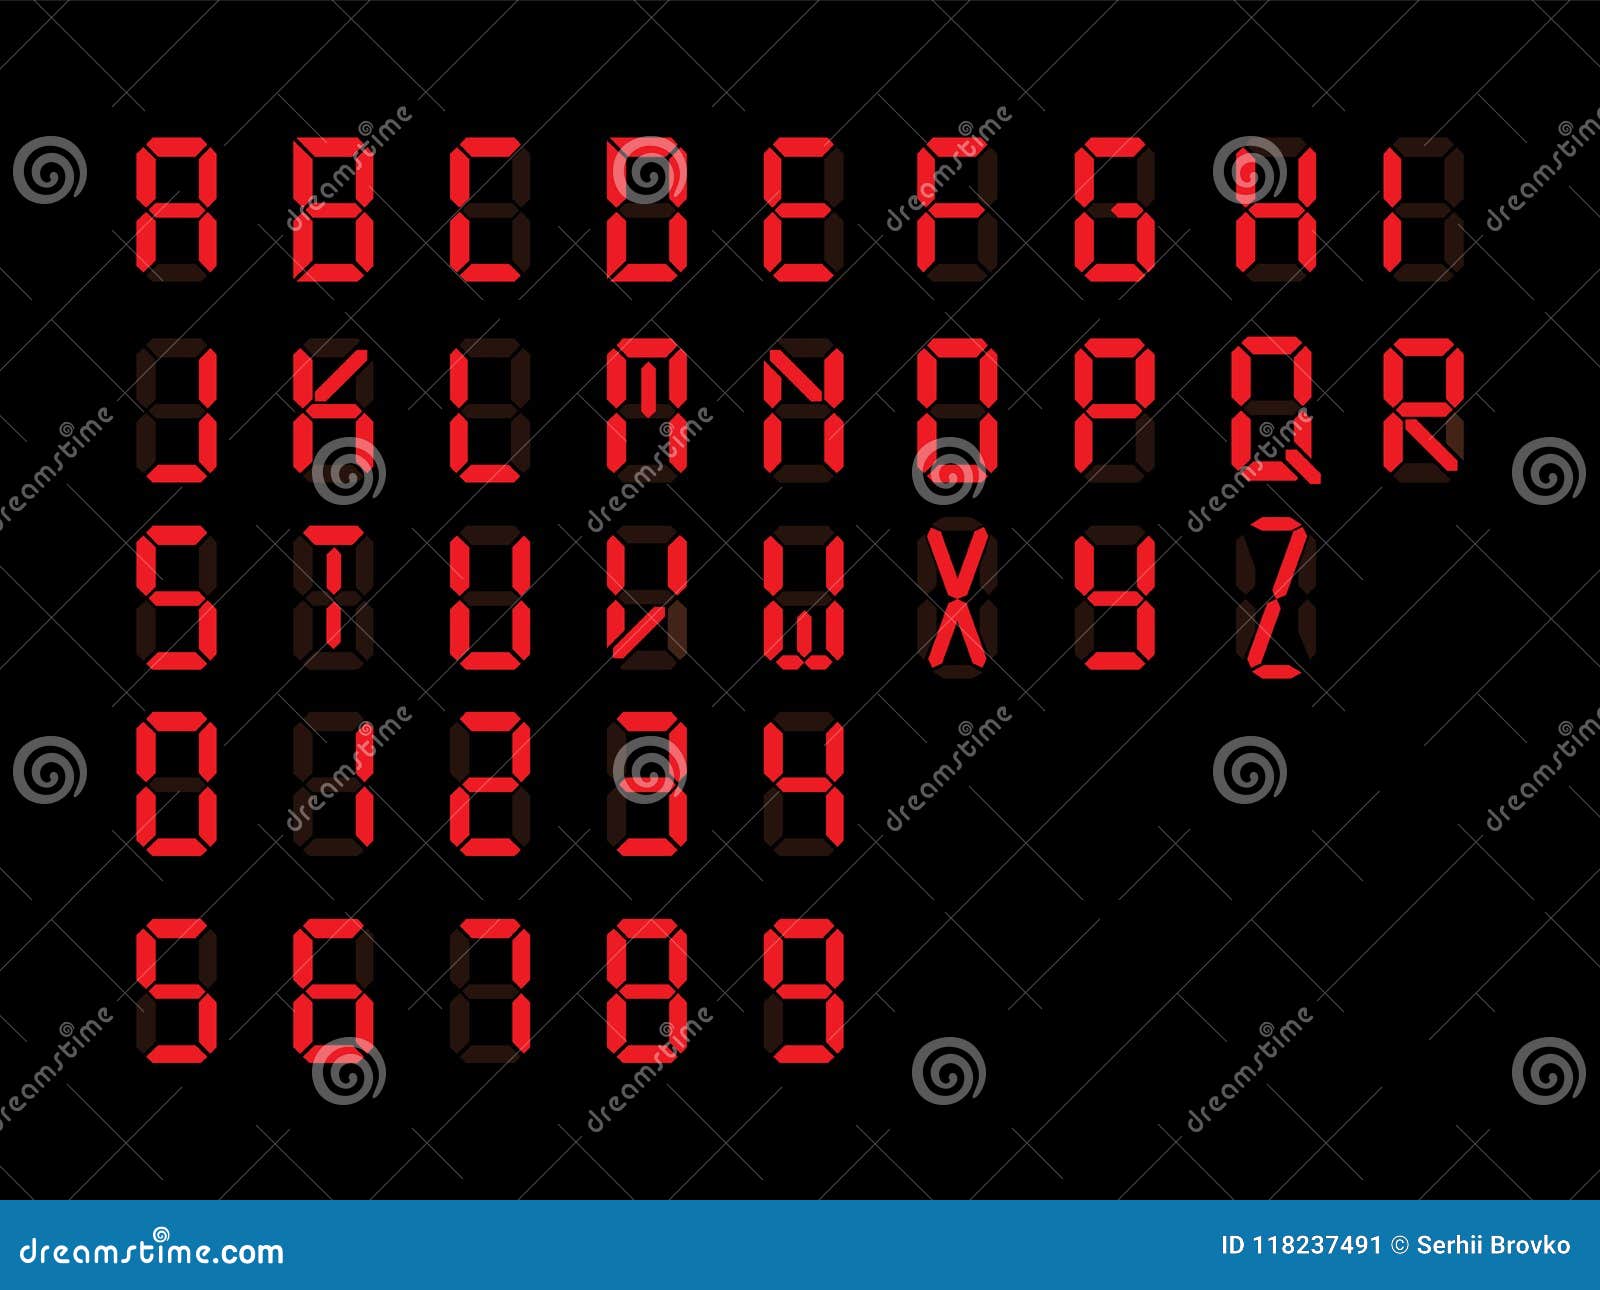 Digital Font. Alarm Clock Letters And Number Isolated On ...